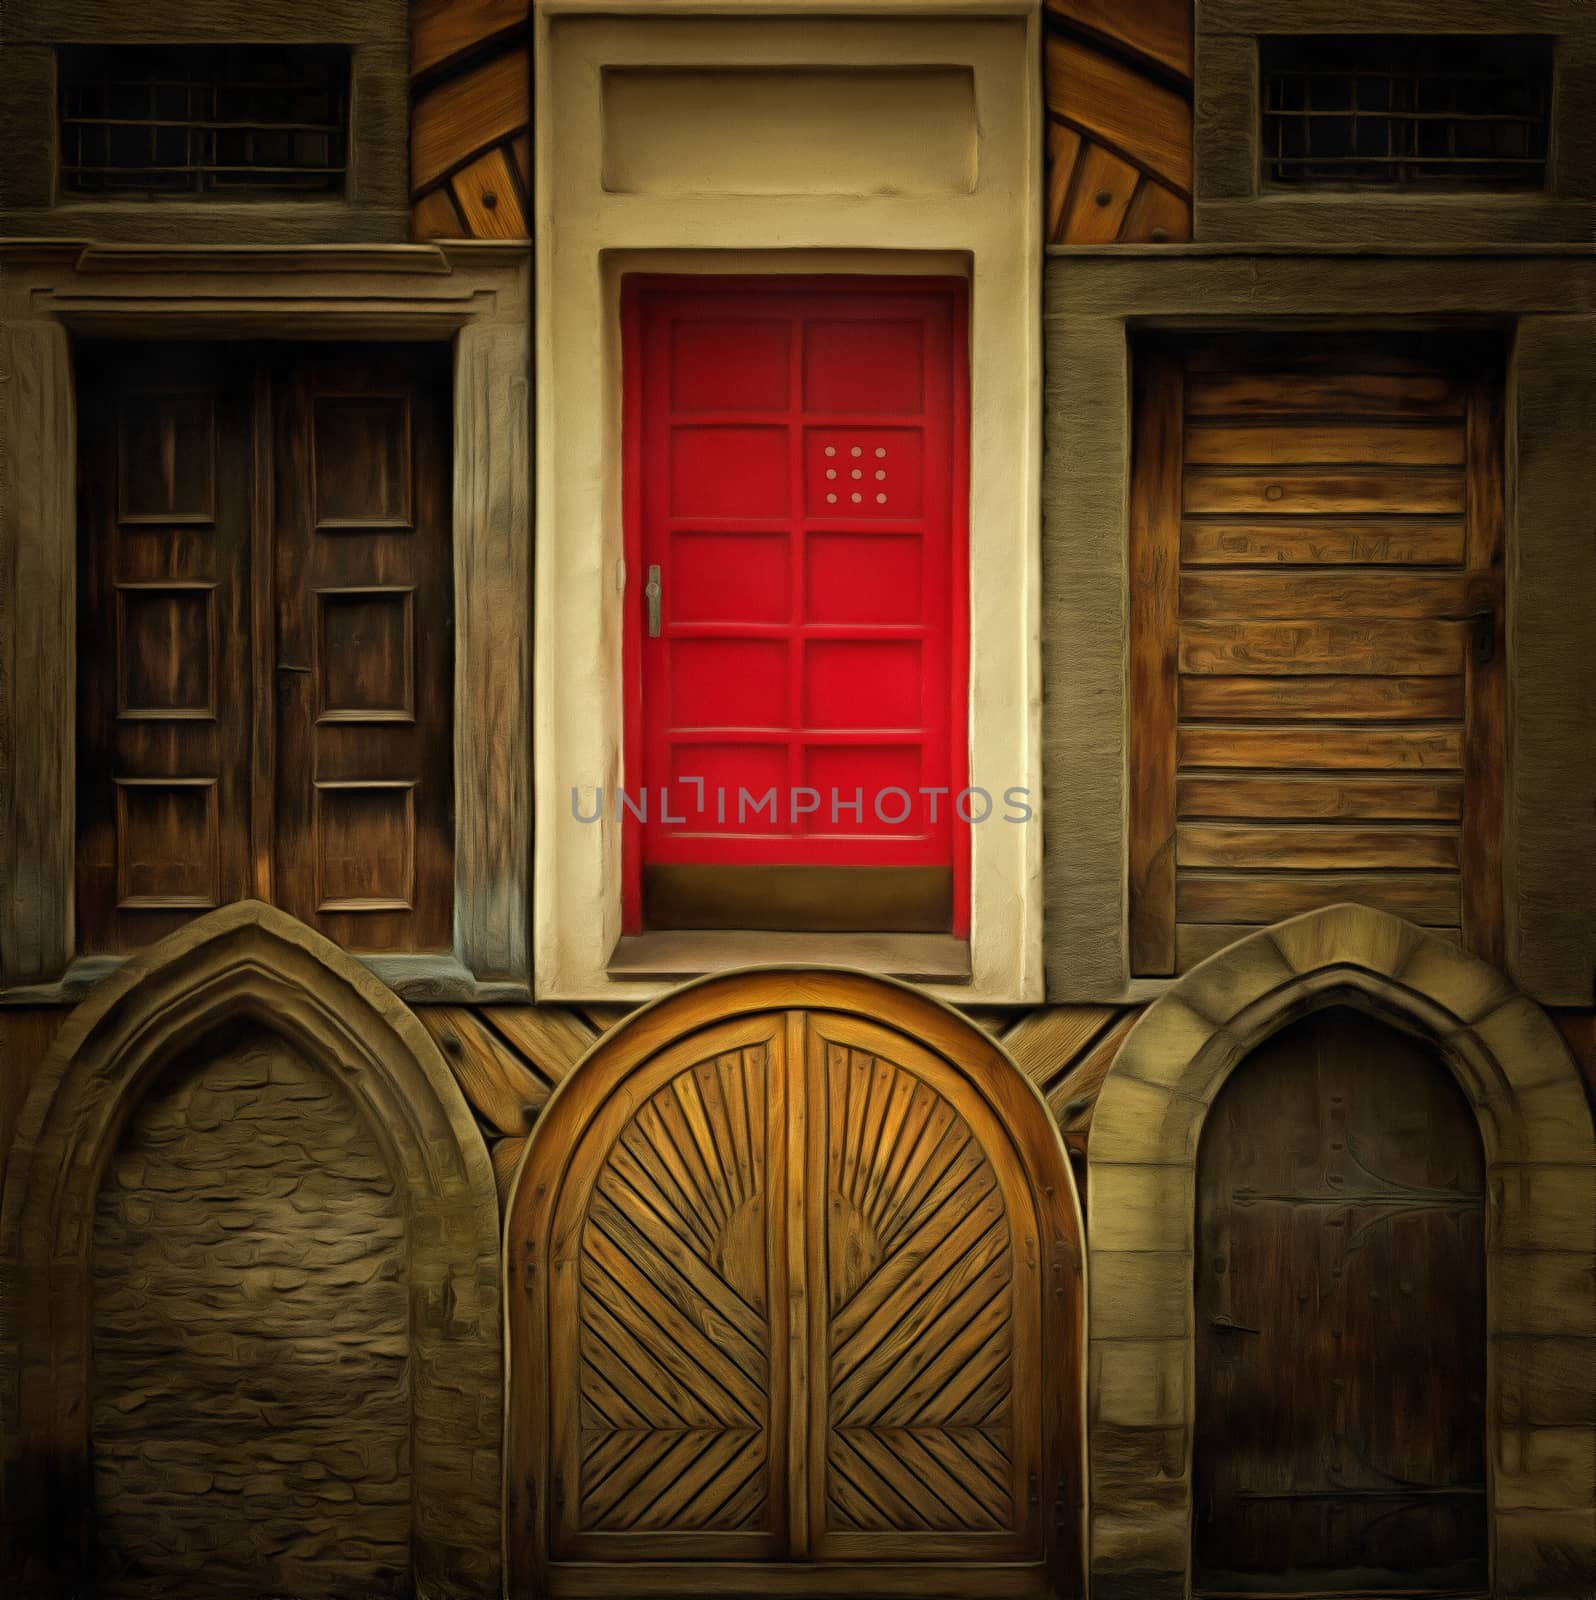 Abstract image of the old doors by Mibuch